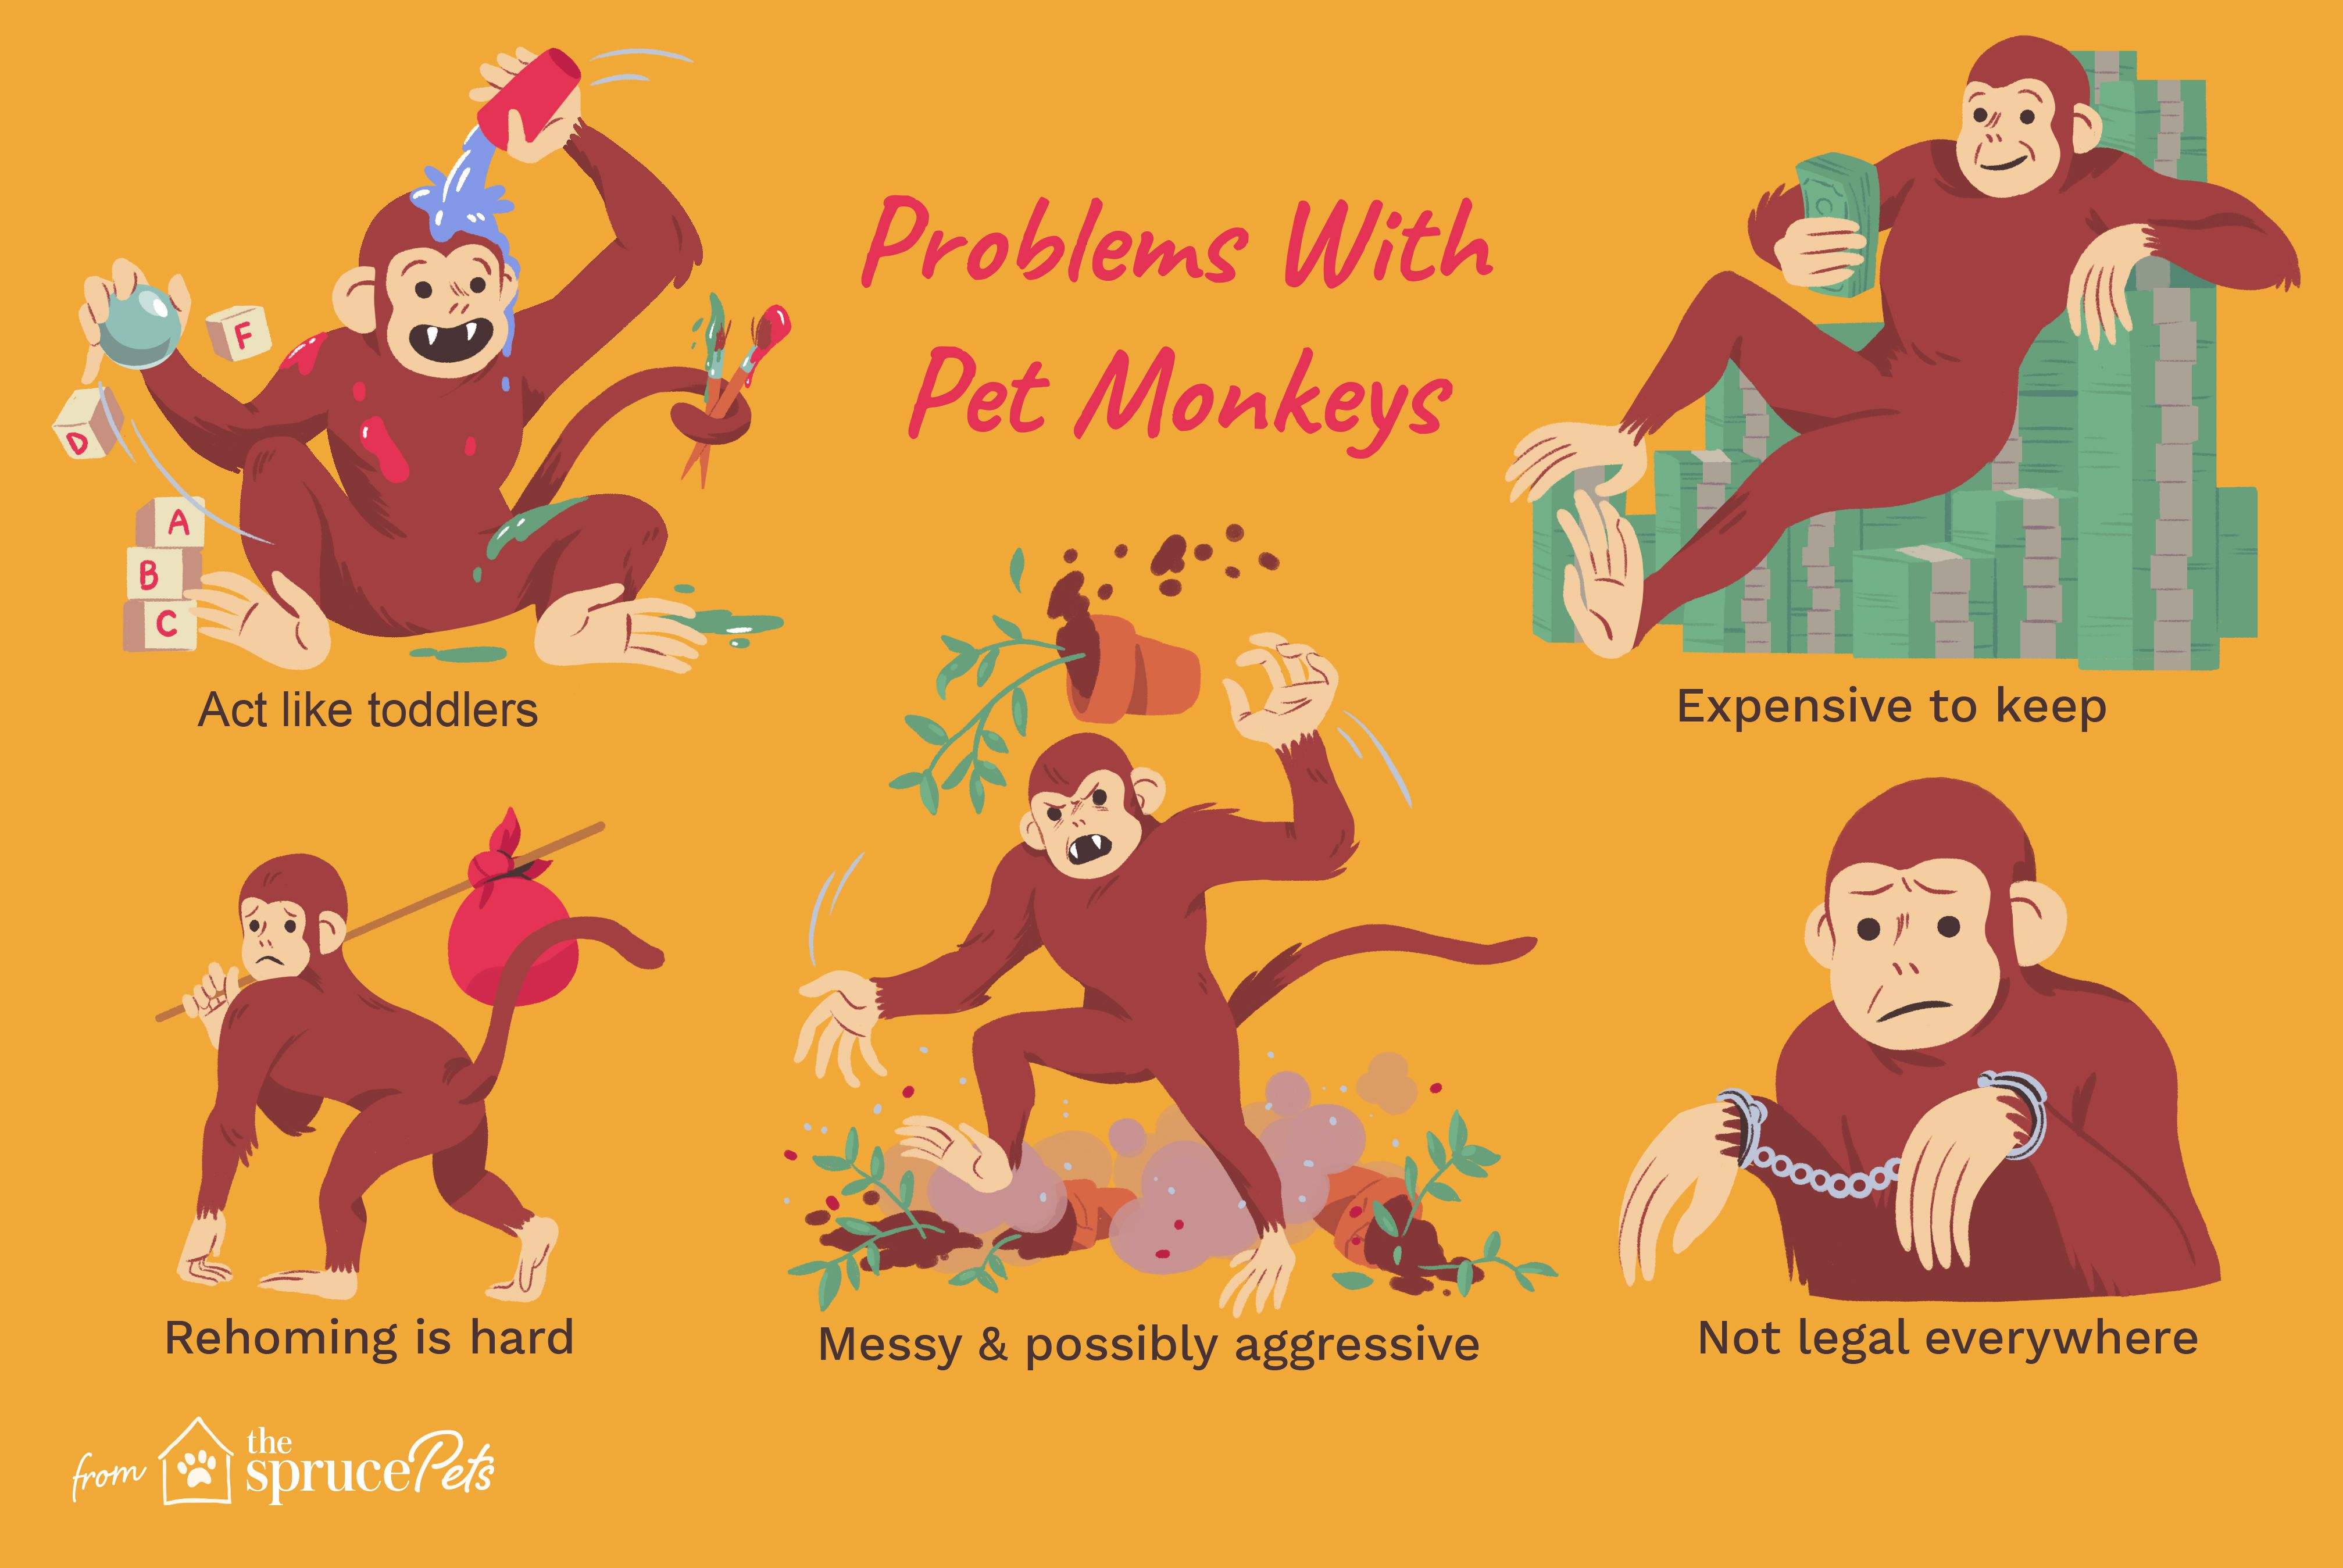 Illustration depicting problems with owning pet monkeys